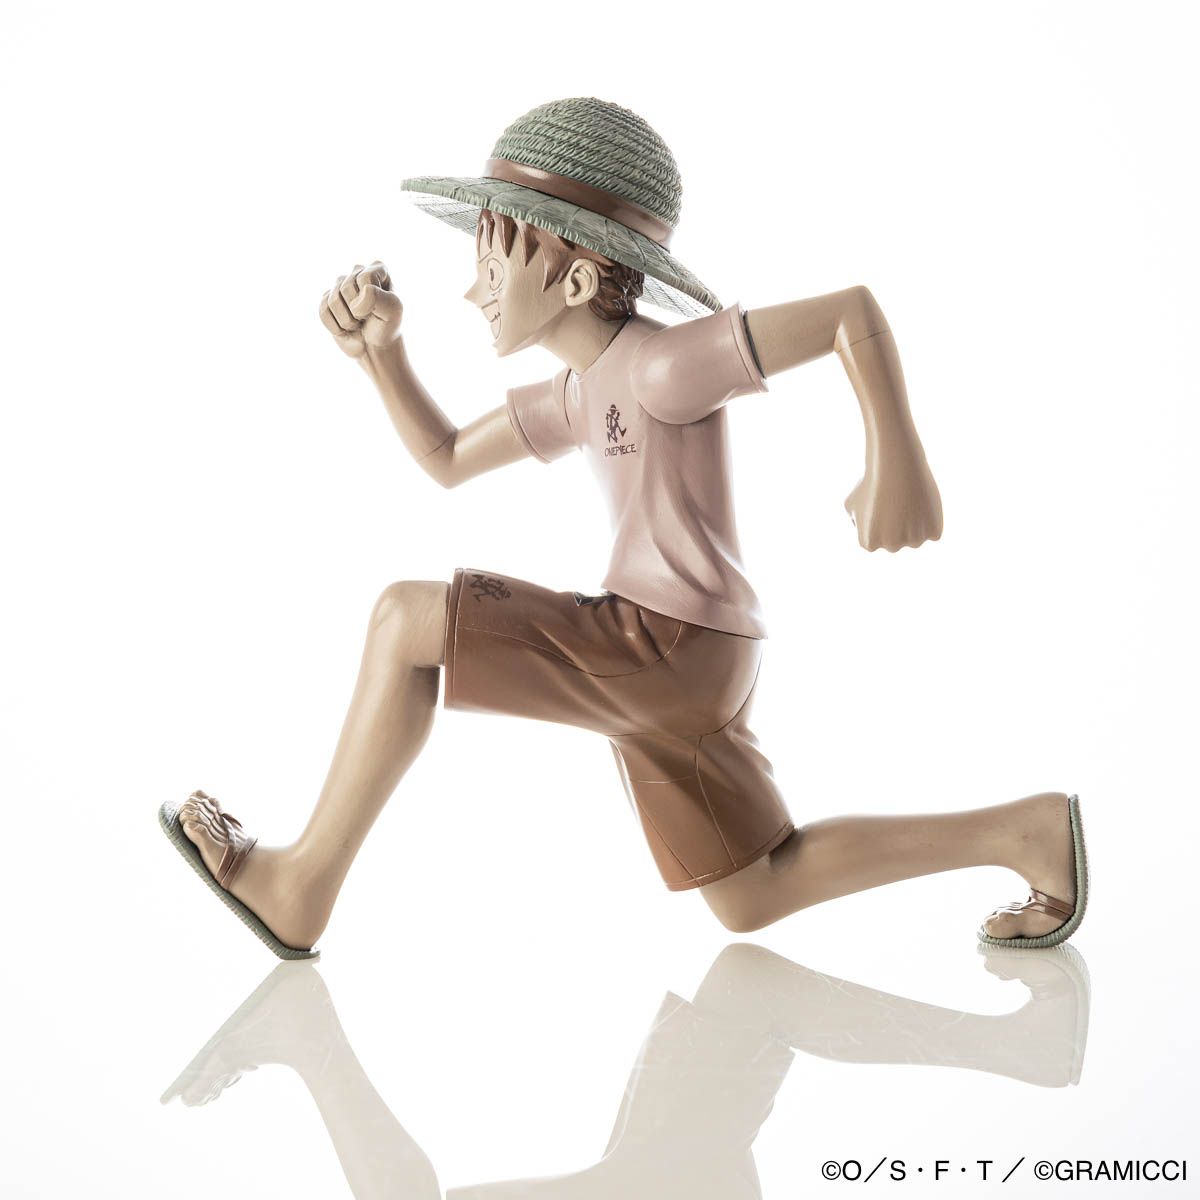 HKDSTOY GRAMICCI x ONE PIECE [Luffy ‘Running man’] Sepia